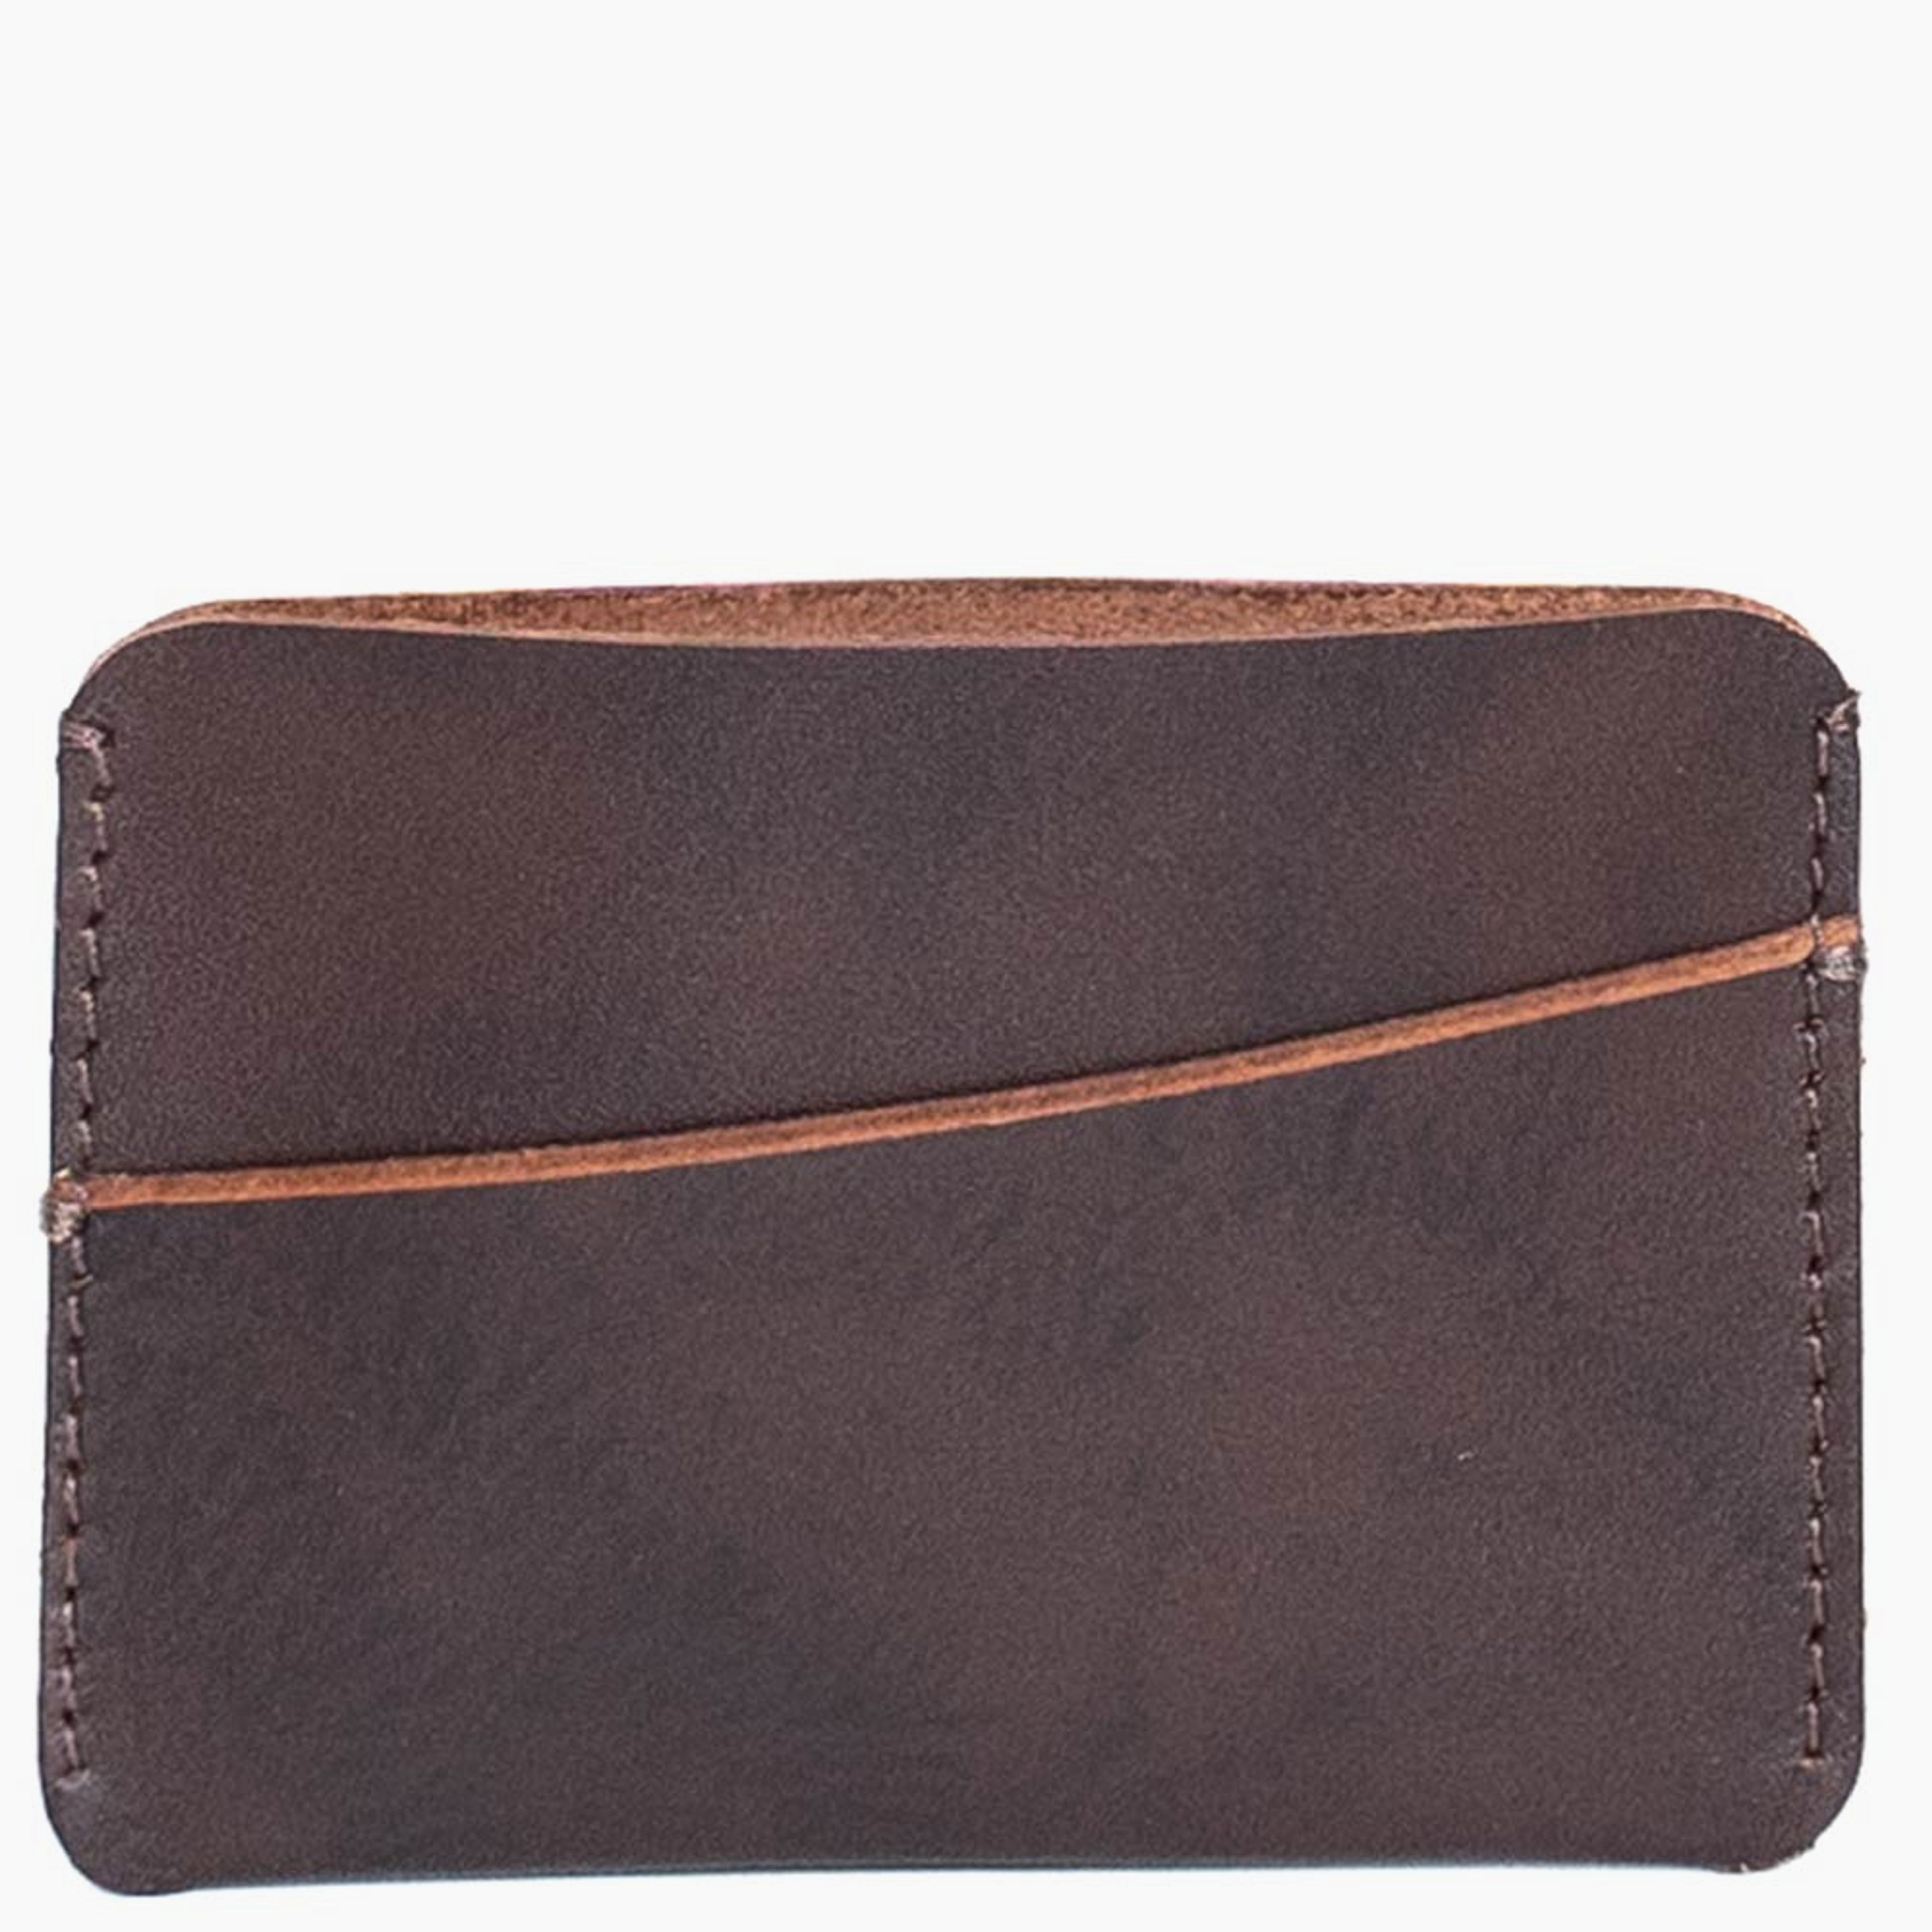 Rustic Leather Card Wallet